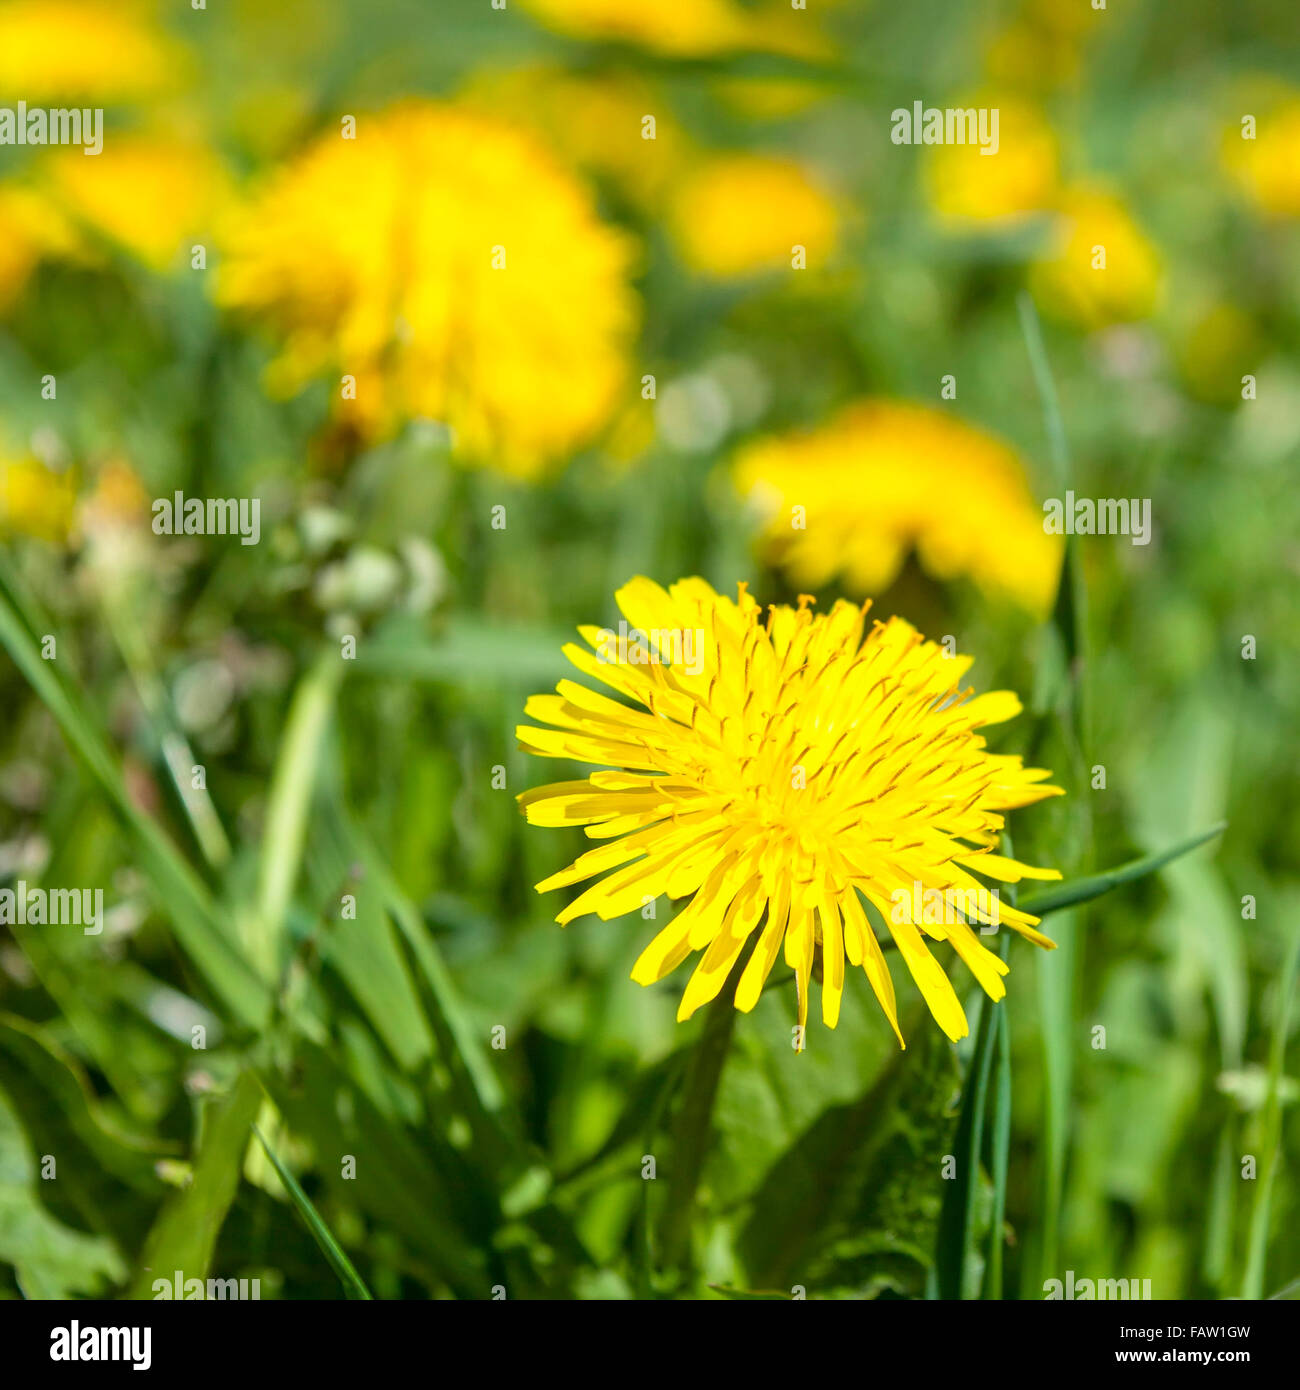 Dandelion (Taraxacum officinale), the common dandelion, is a flowering herbaceous perennial plant of the family Asteraceae (Compositae)  Model Release: No.  Property Release: No. Stock Photo